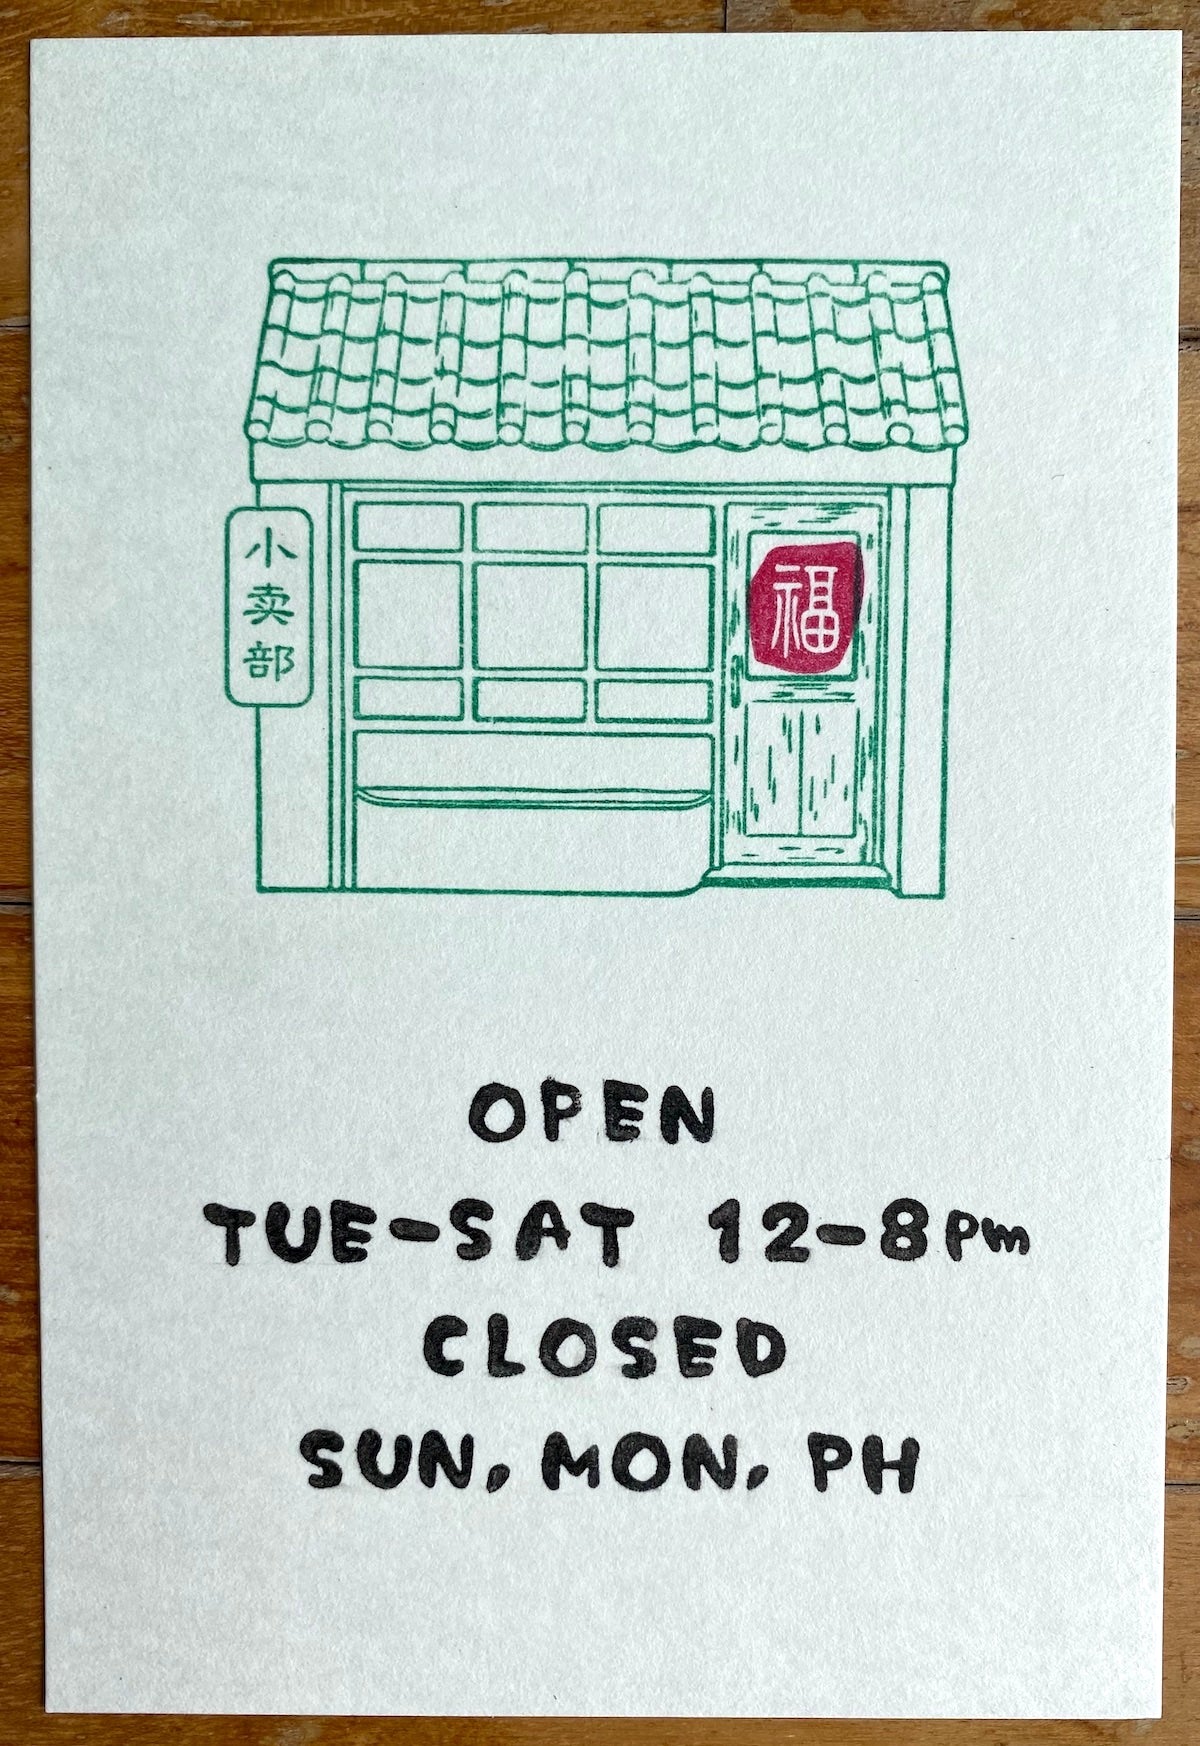 Revised Shop Opening Hours